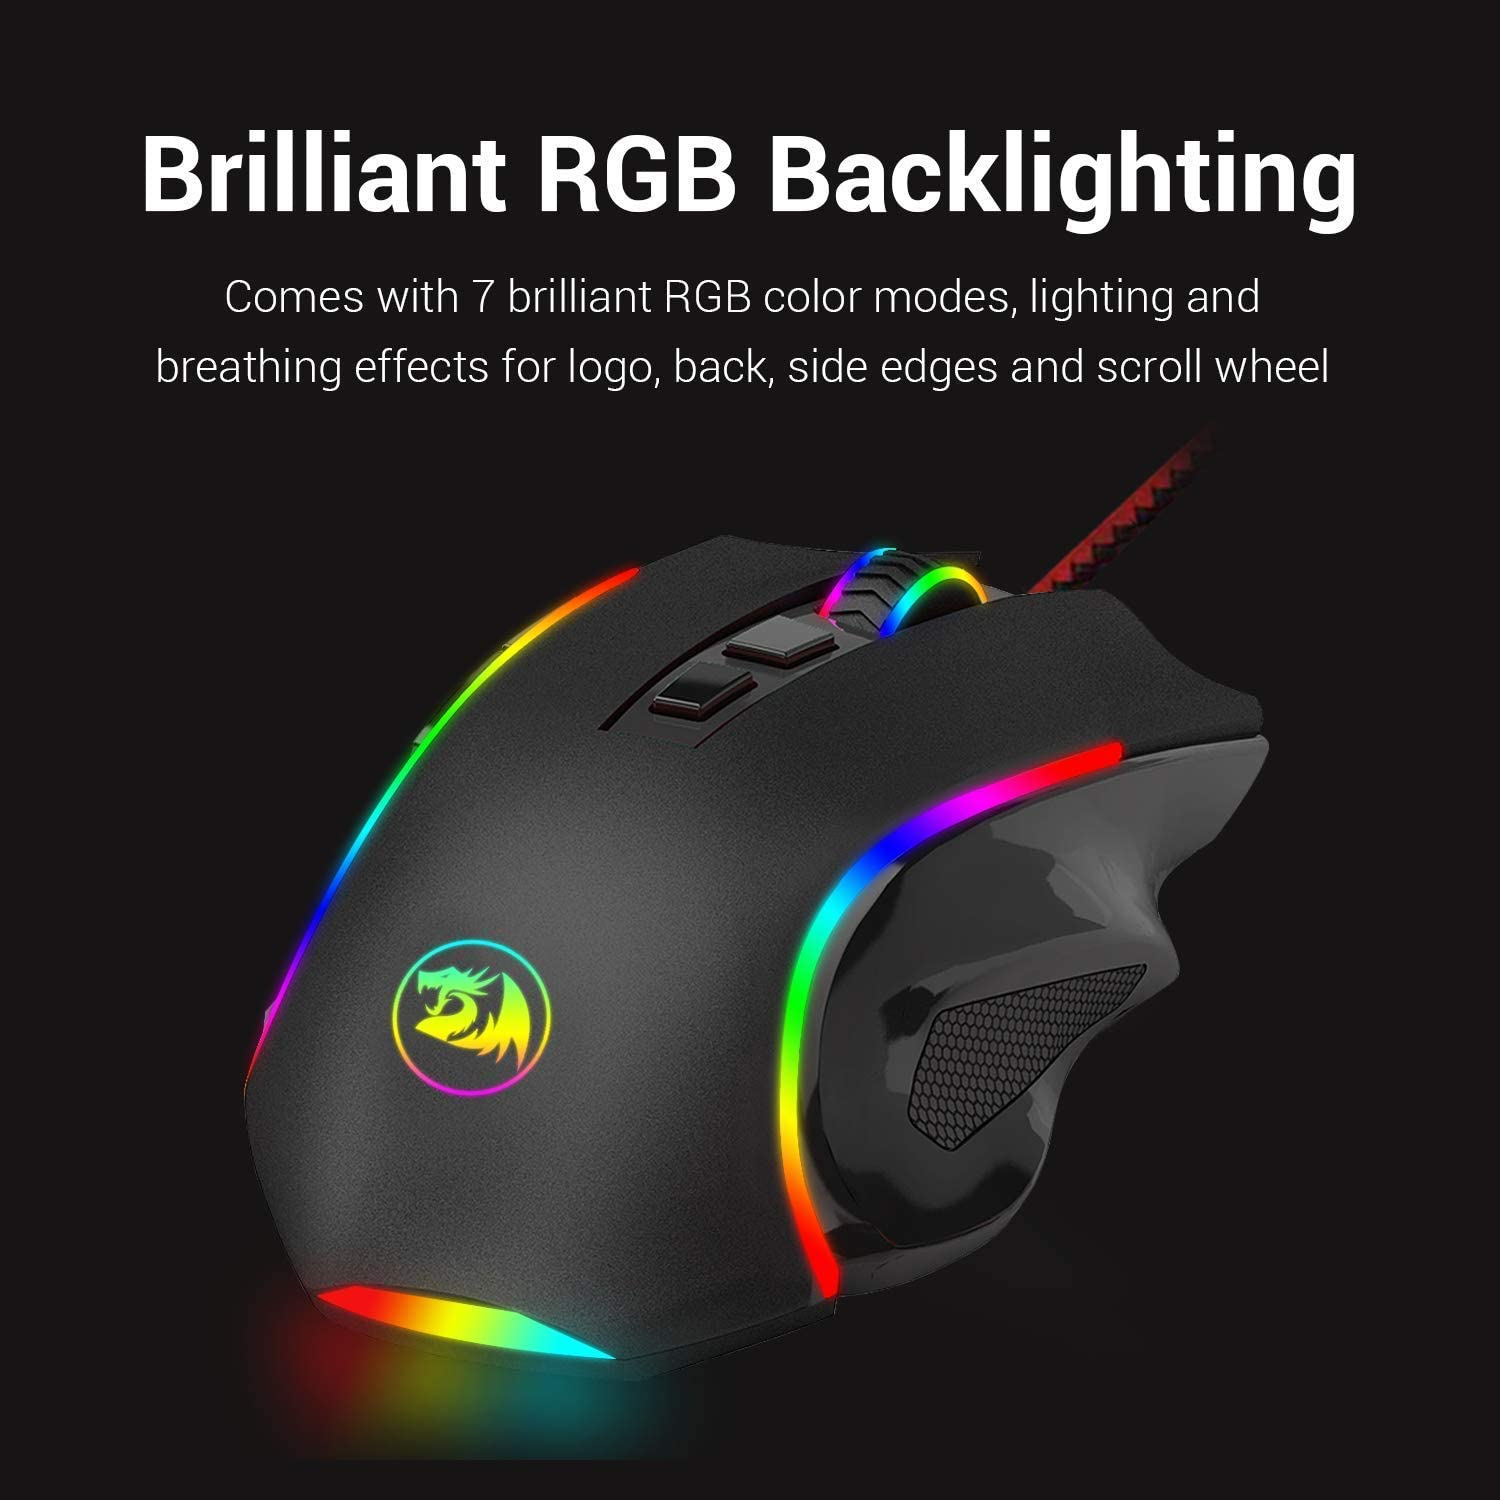 A gaming mouse with RGB lighting could still be quite affordable.